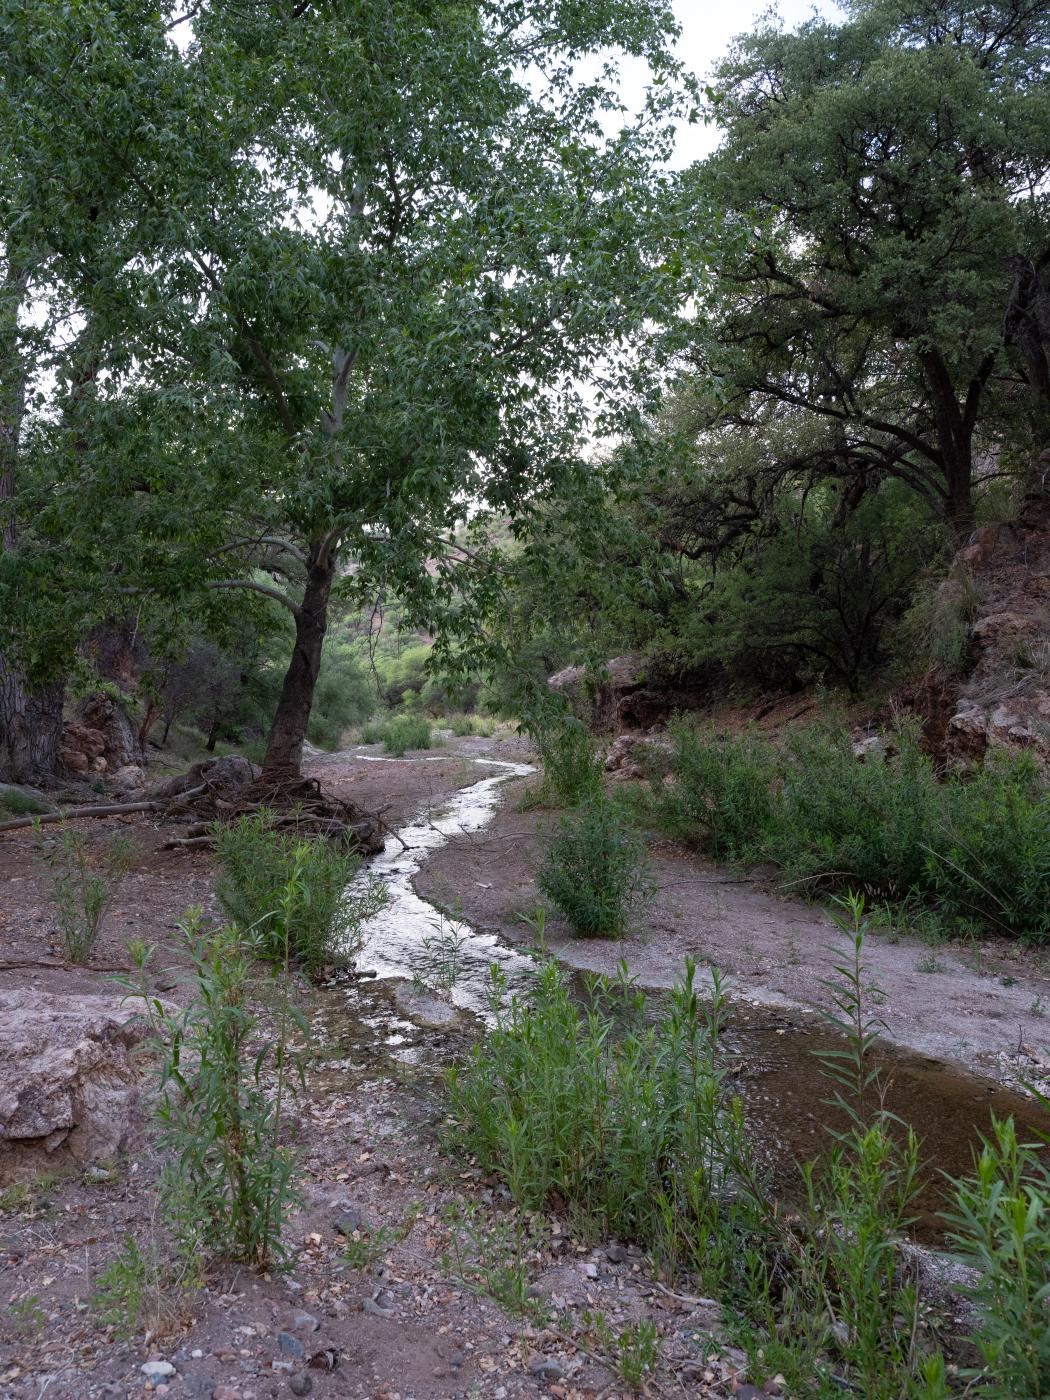 Harshaw Creek runs through Pata...atened species that live there.